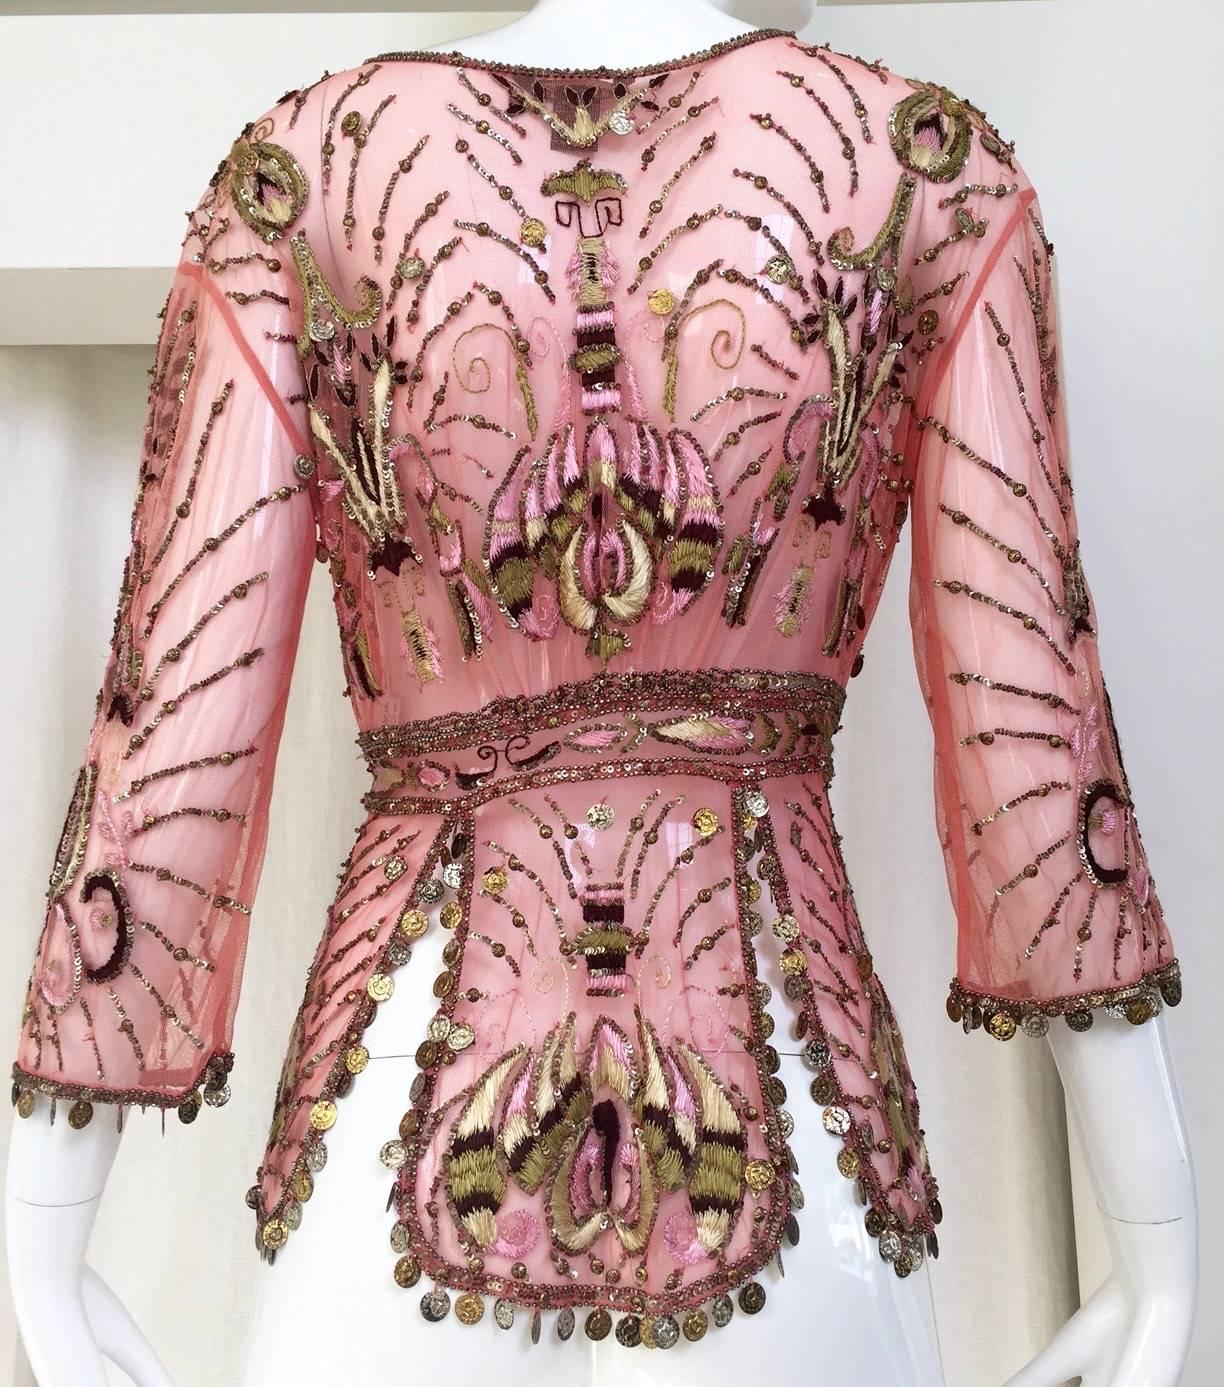 Beautiful Roberto Cavalli embroidered mesh beaded silk cardigan in salmon pink. Three quarter length sleeves. cardigan/blouse has tie closure. gold charms on the sleeves and at the bottom trim of the blouse.
Size: 4
Shoulder: 16